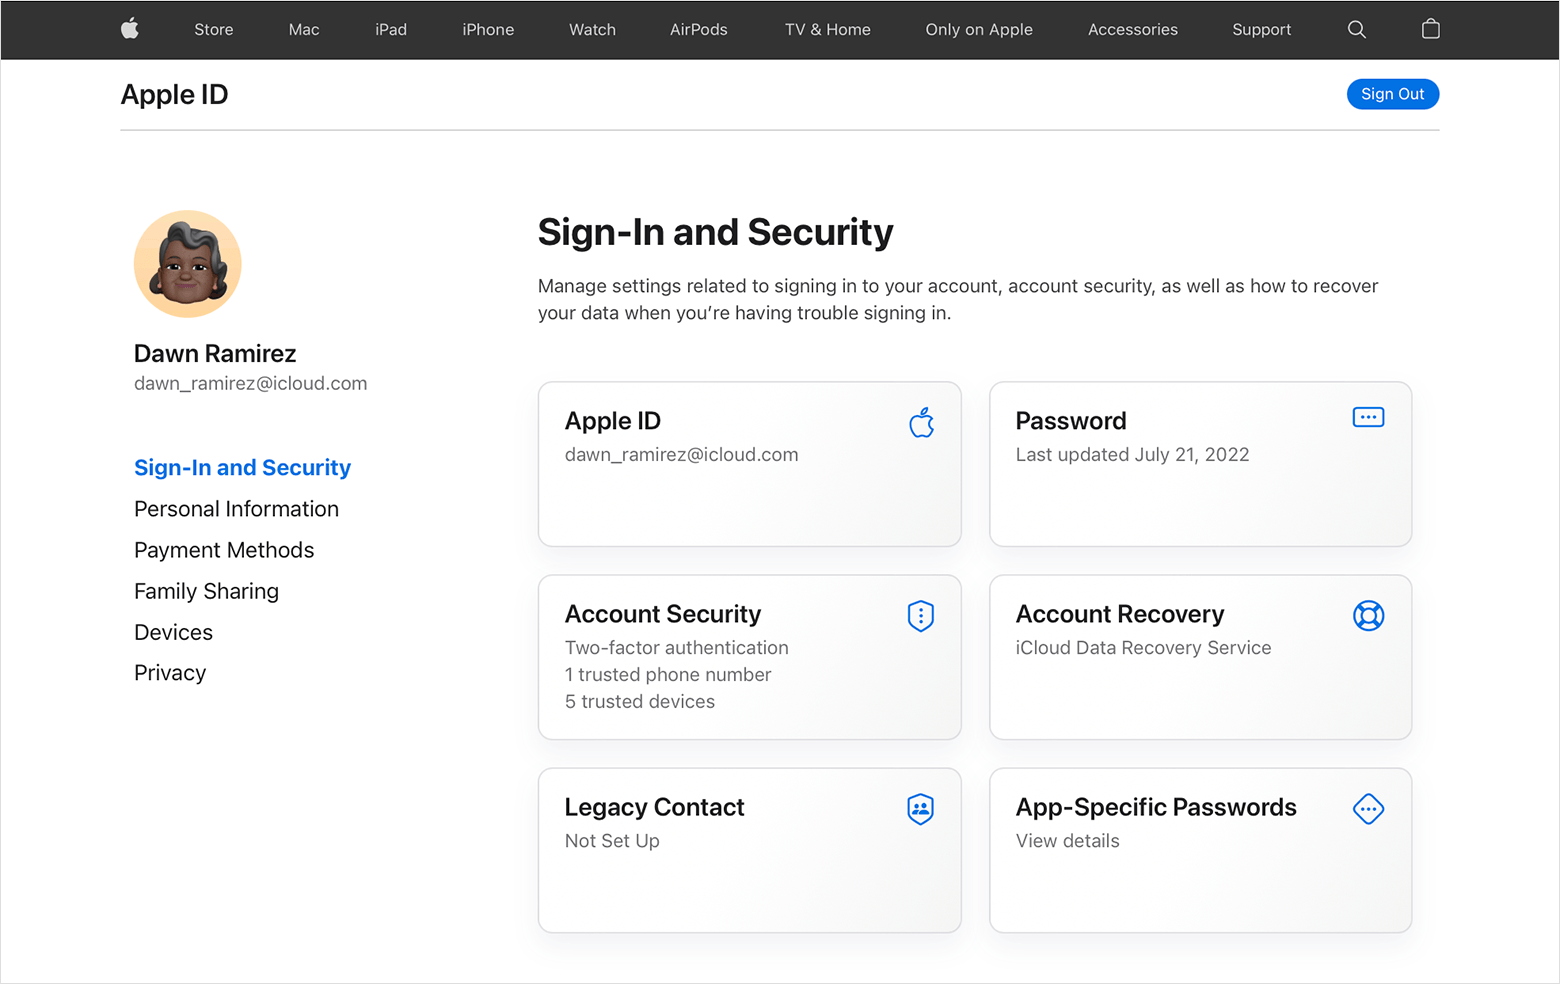 Change your Apple ID password on the web